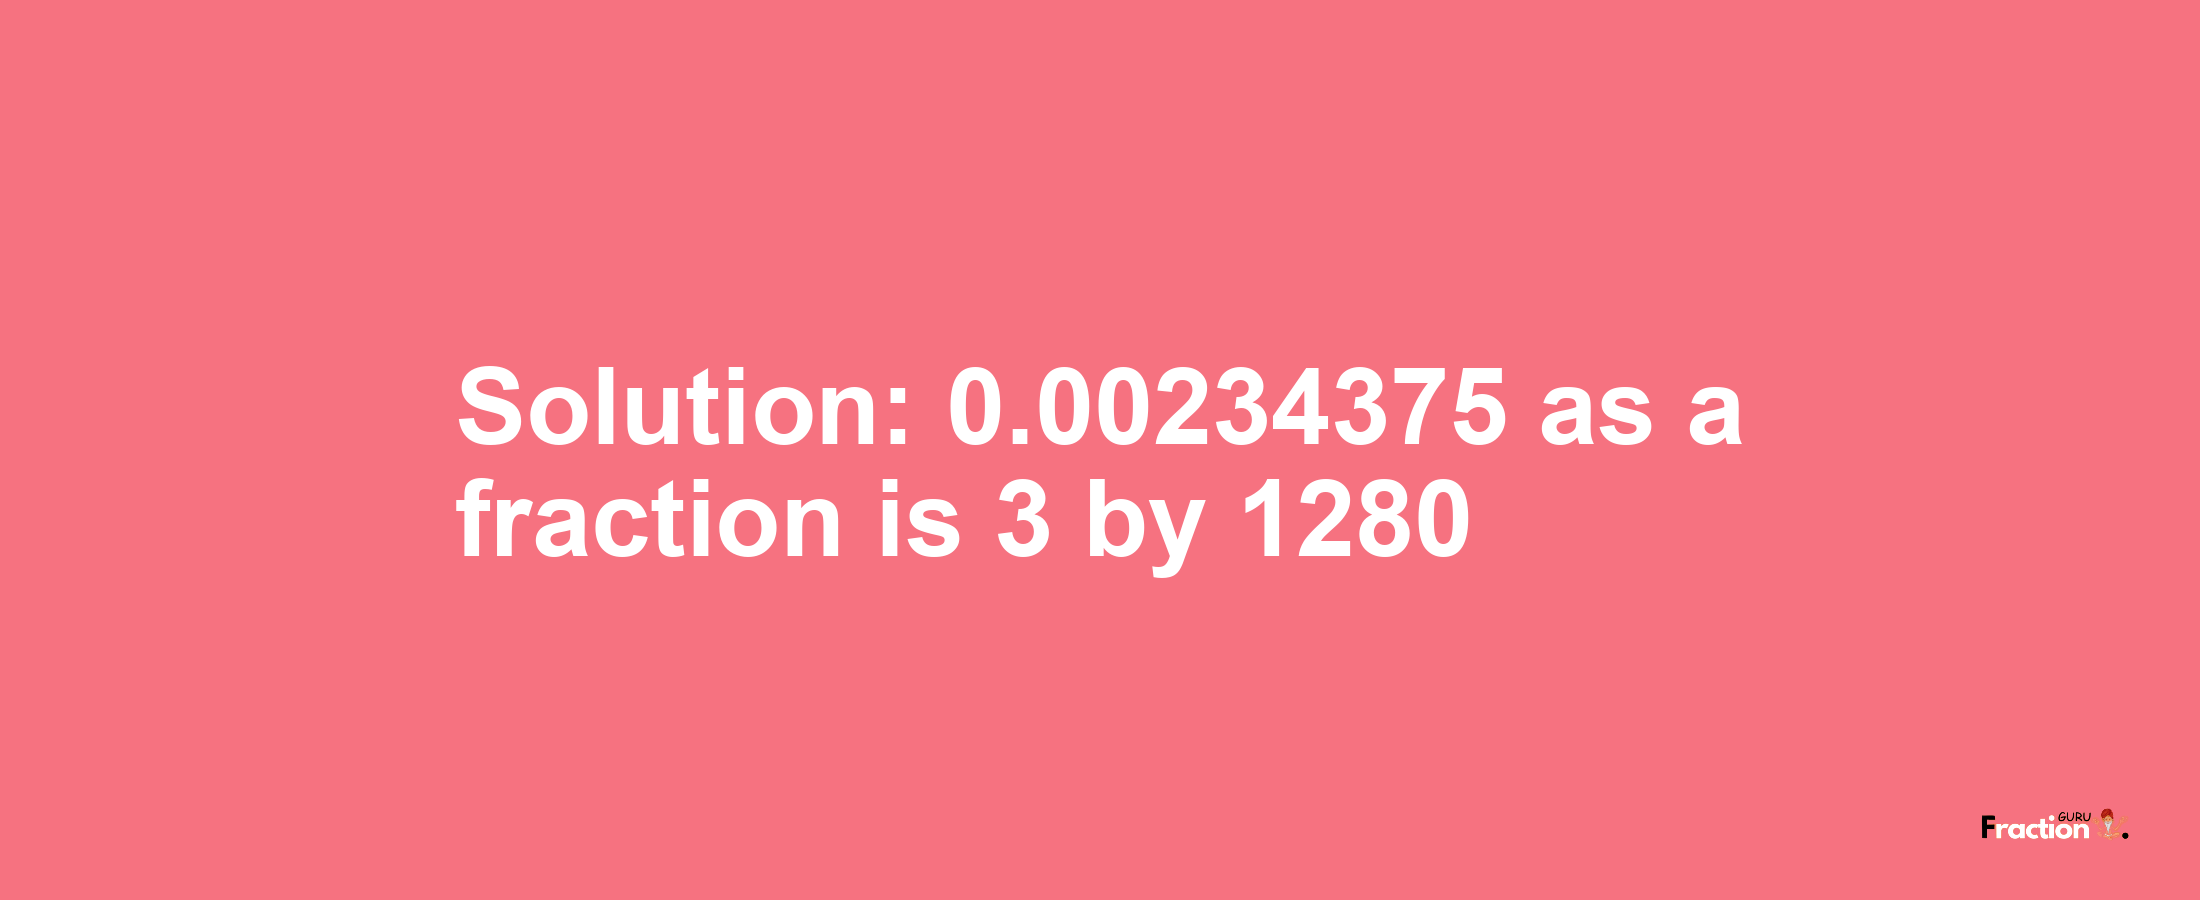 Solution:0.00234375 as a fraction is 3/1280